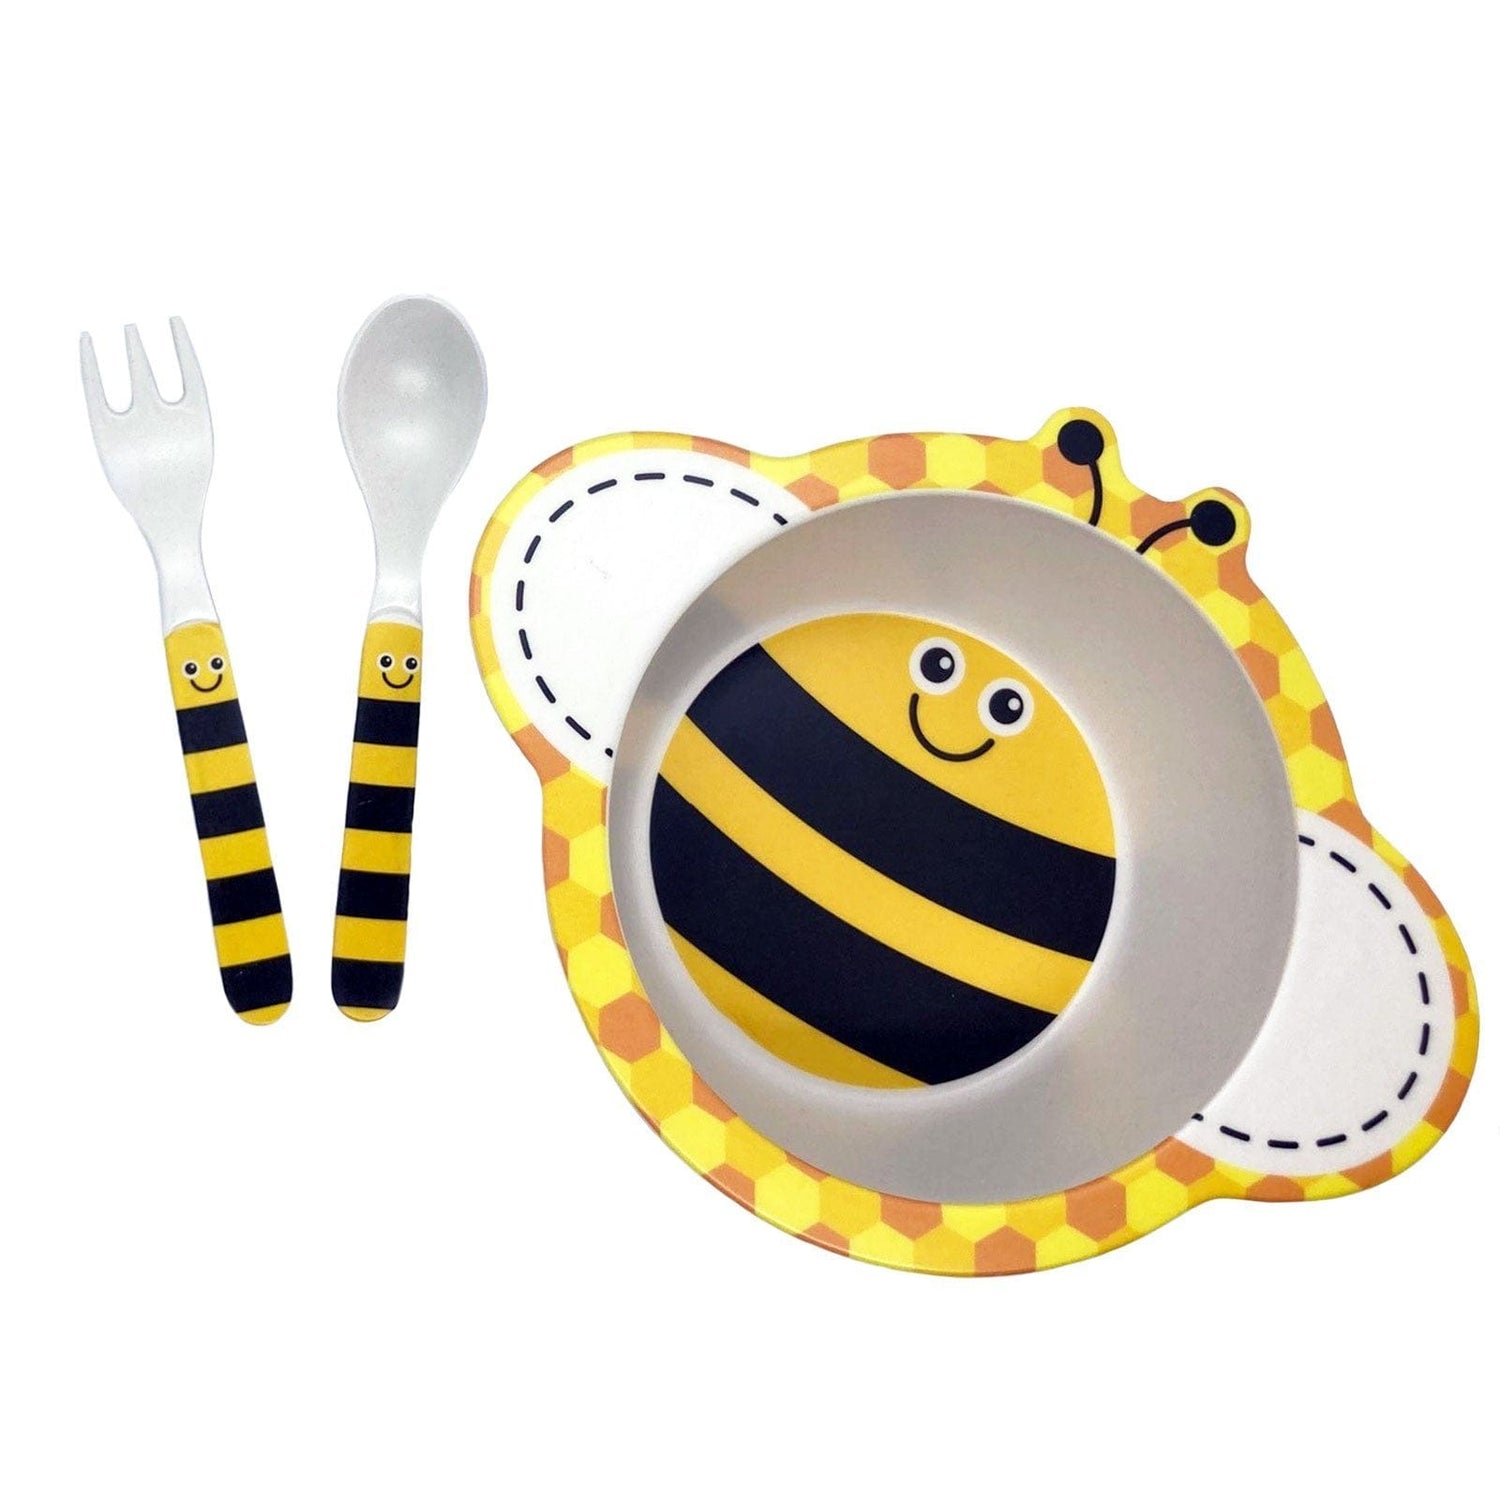 Bumble Bee Bamboo Bowl and Cutlery Set